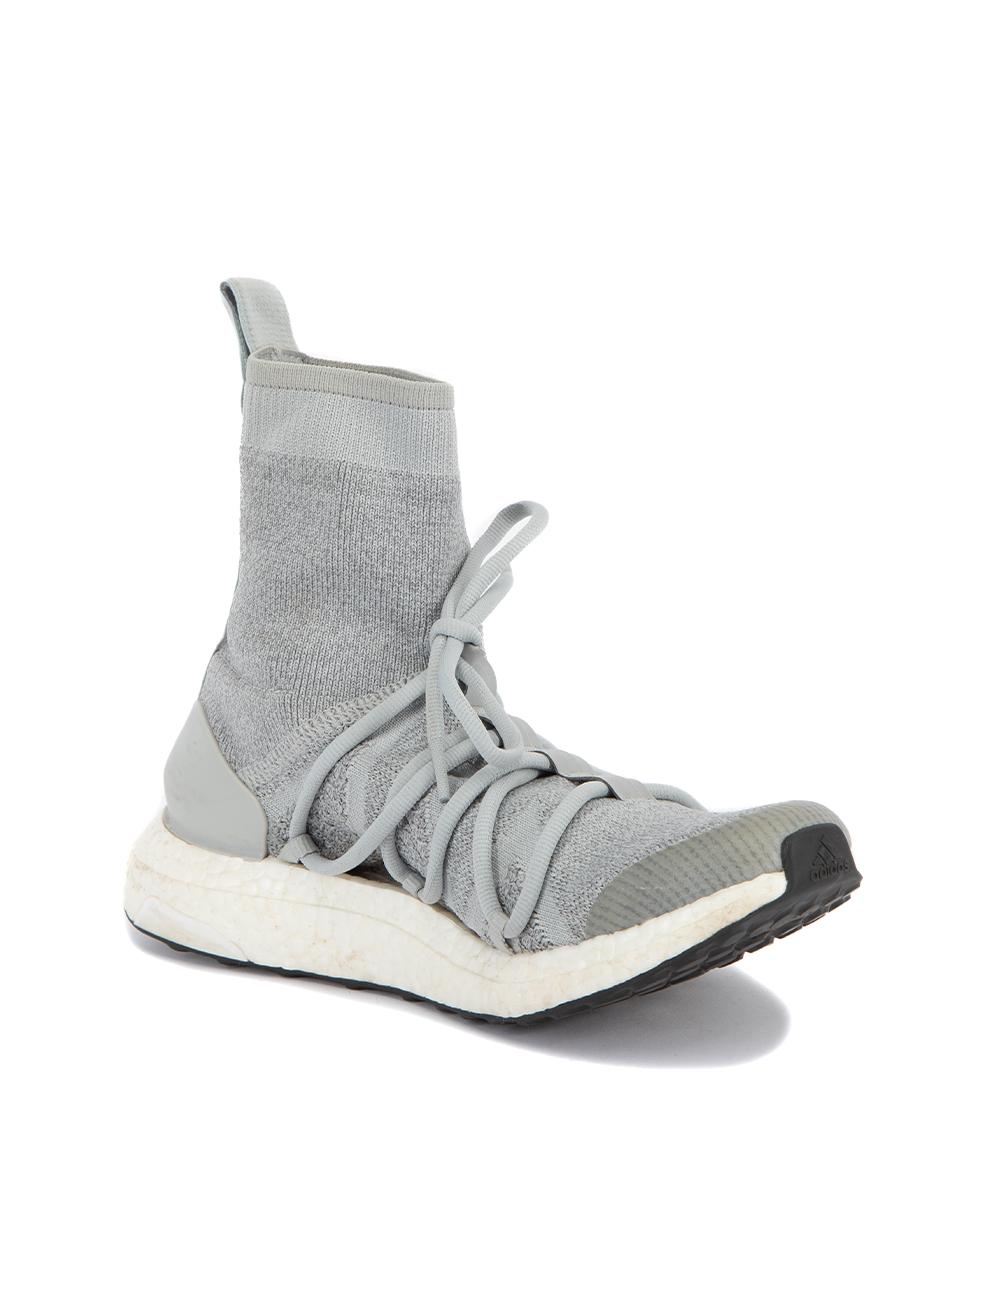 CONDITION is Very good. Hardly any visible wear to shoes is evident. Minor dirt marks along the platform of the shoes is seen on this used Adidas by Stella McCartney designer resale item. Details Grey Cloth Sock style High top Ultra boost Lace up